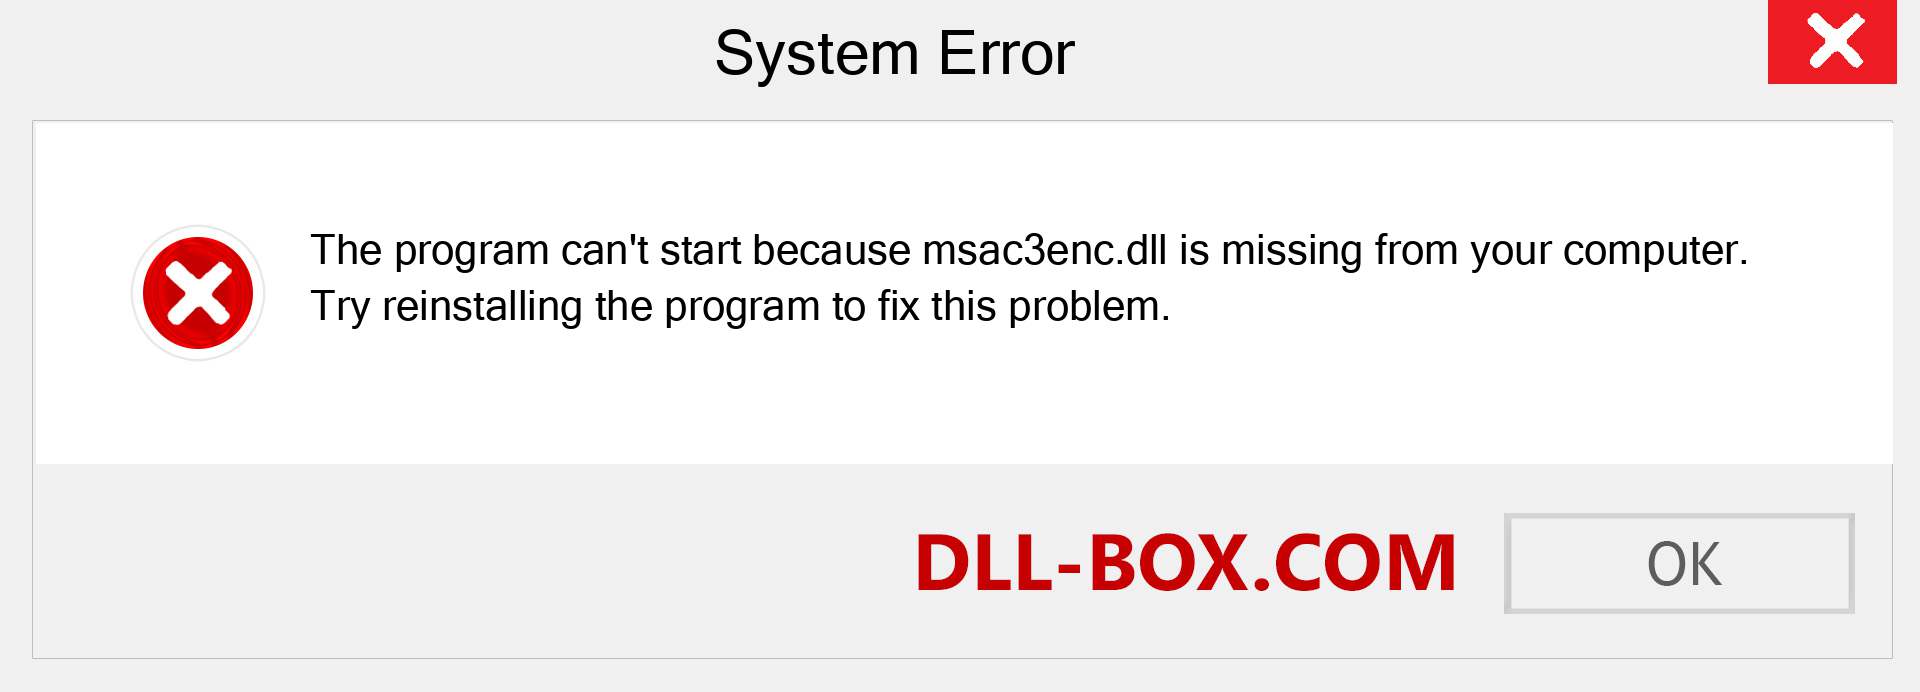  msac3enc.dll file is missing?. Download for Windows 7, 8, 10 - Fix  msac3enc dll Missing Error on Windows, photos, images